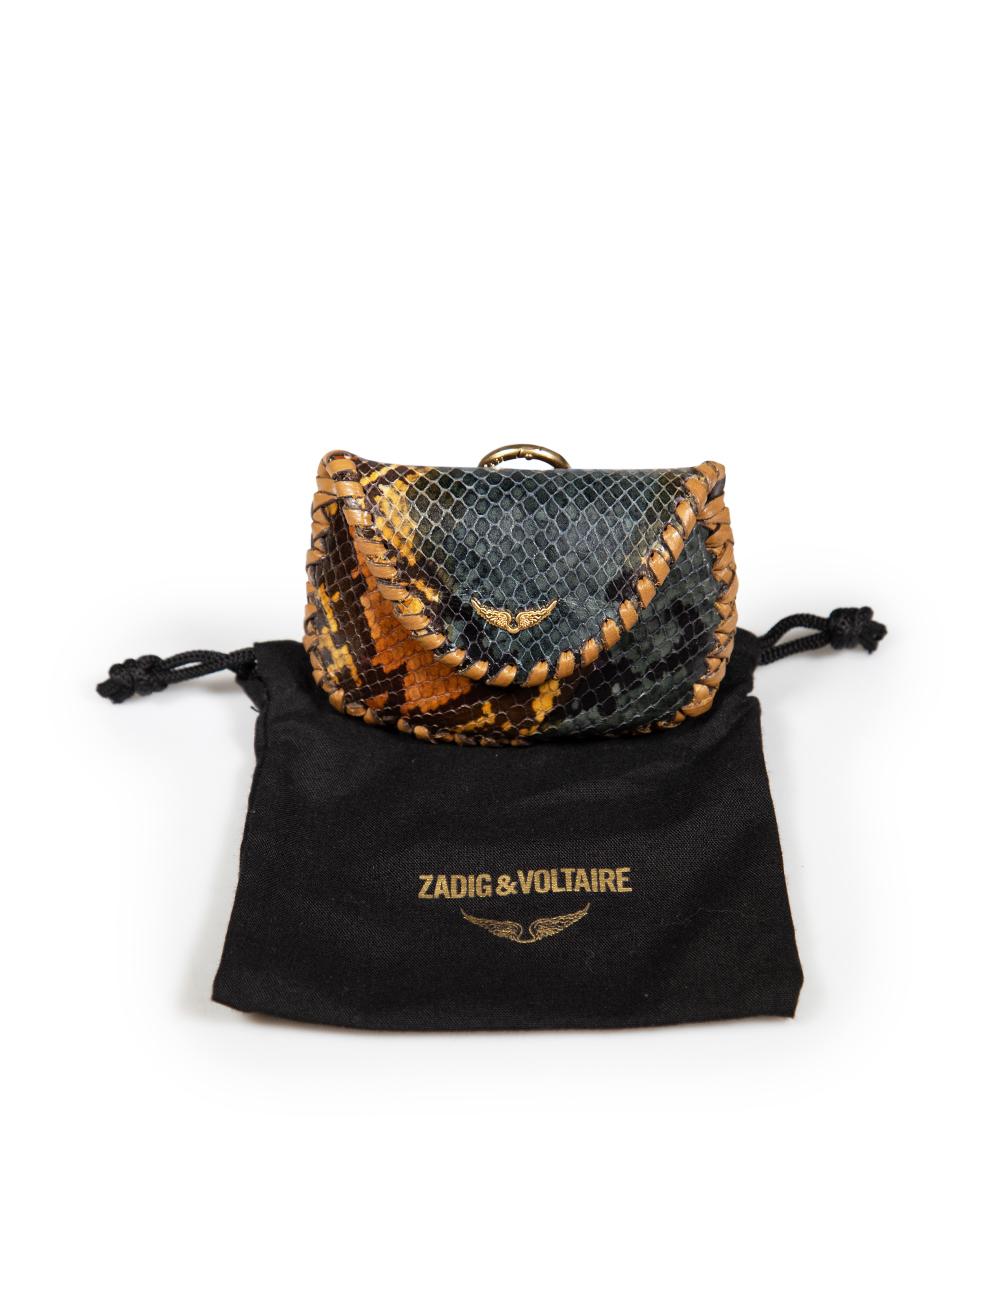 Zadig & Voltaire Snakeskin Coin Purse For Sale 2